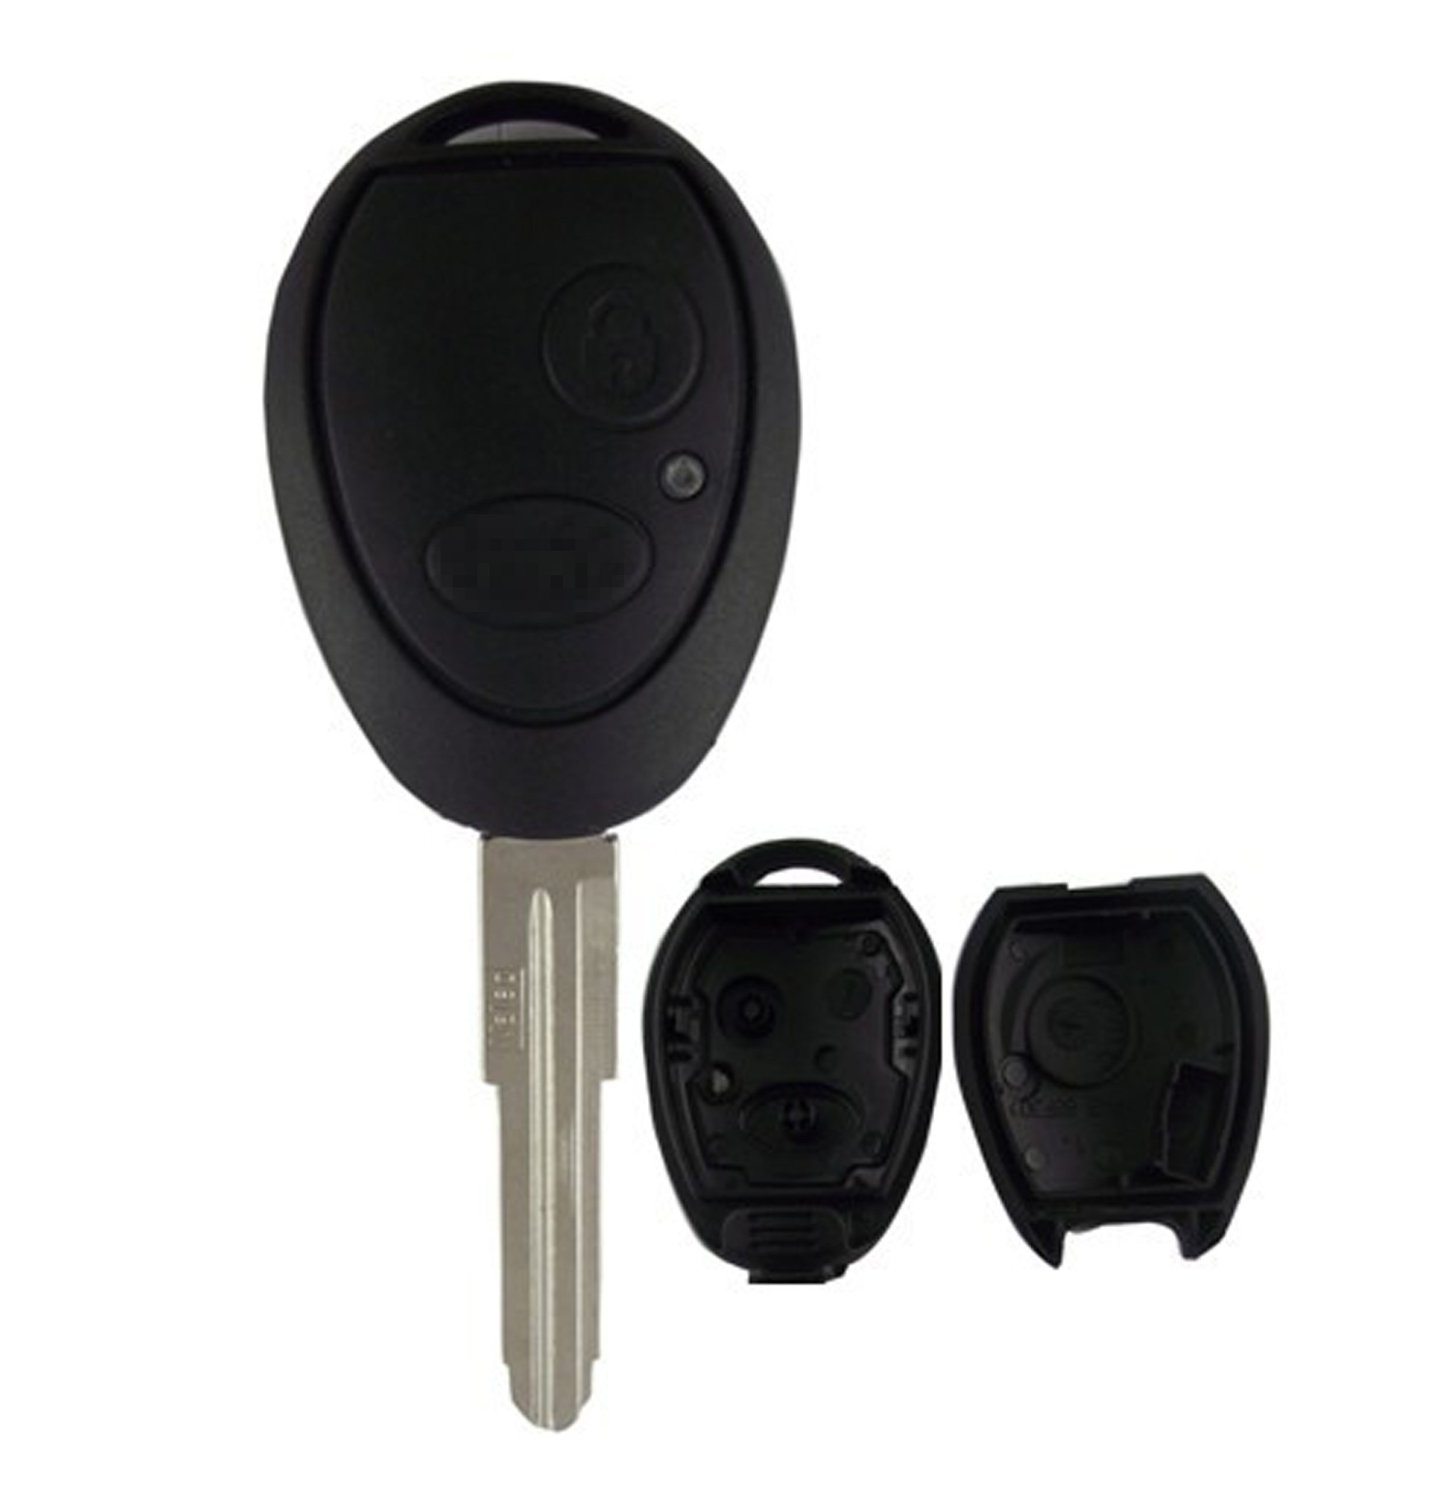 

Keyless 2 Buttons Smart Remote Car Key Fob Shell Case For 1999 2000 2001 2002 2003 2004 Land Rover Discovery Replacement N5FVALTX3 No Chip, Black